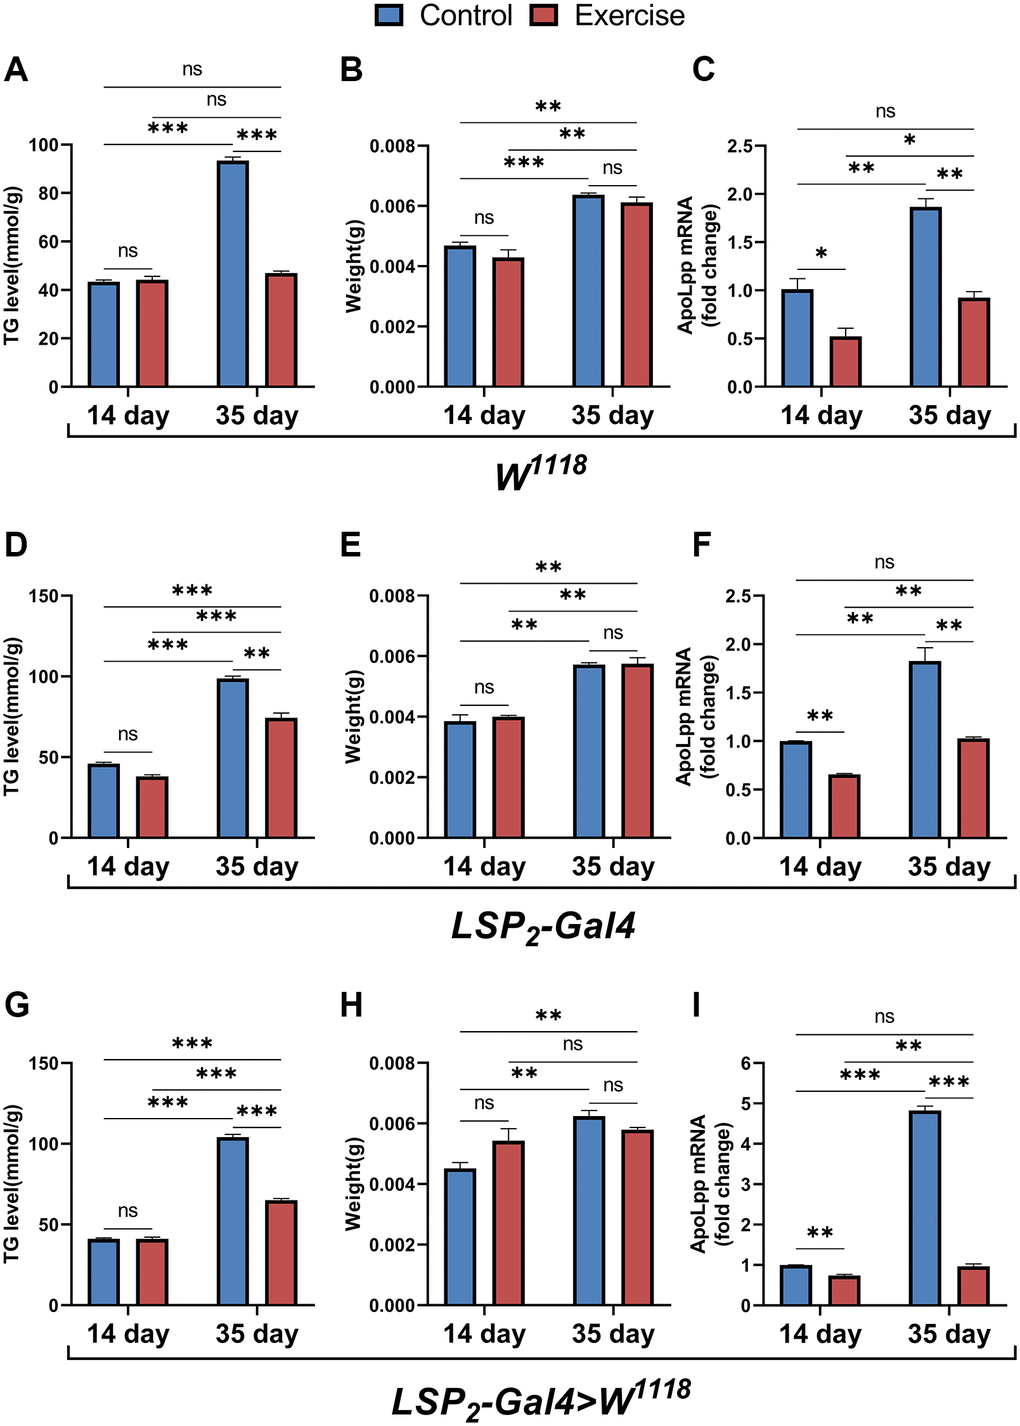 Effects of ELEL on lipid metabolism in flies under different genotype. (A–C) Whole-body TG levels, body weight, and whole-body apoLpp mRNA levels in exercise-treated 14- and 35-days-old flies in the W1118. (D–F) Whole-body TG levels, body weight, and whole-body apoLpp mRNA levels in exercise-treated 14- and 35-days-old flies in the LSP2-Gal4. (G–I) Whole-body TG levels, body weight, and whole-body apoLpp mRNA levels in exercise-treated 14- and 35-days-old flies in the LSP2-Gal4>W1118. To detect whole-body TG, the sample size of all flies was 5, and measured in triplicate. For body weight, values are expressed as the body weight of 5 flies and measured in triplicate. GAPDH was used to normalize these values for whole-body apoLpp mRNA expression levels in flies, and N = 10. All values are expressed as mean ± SEM, and all P-values are from student t-tests. *p **p ***p 